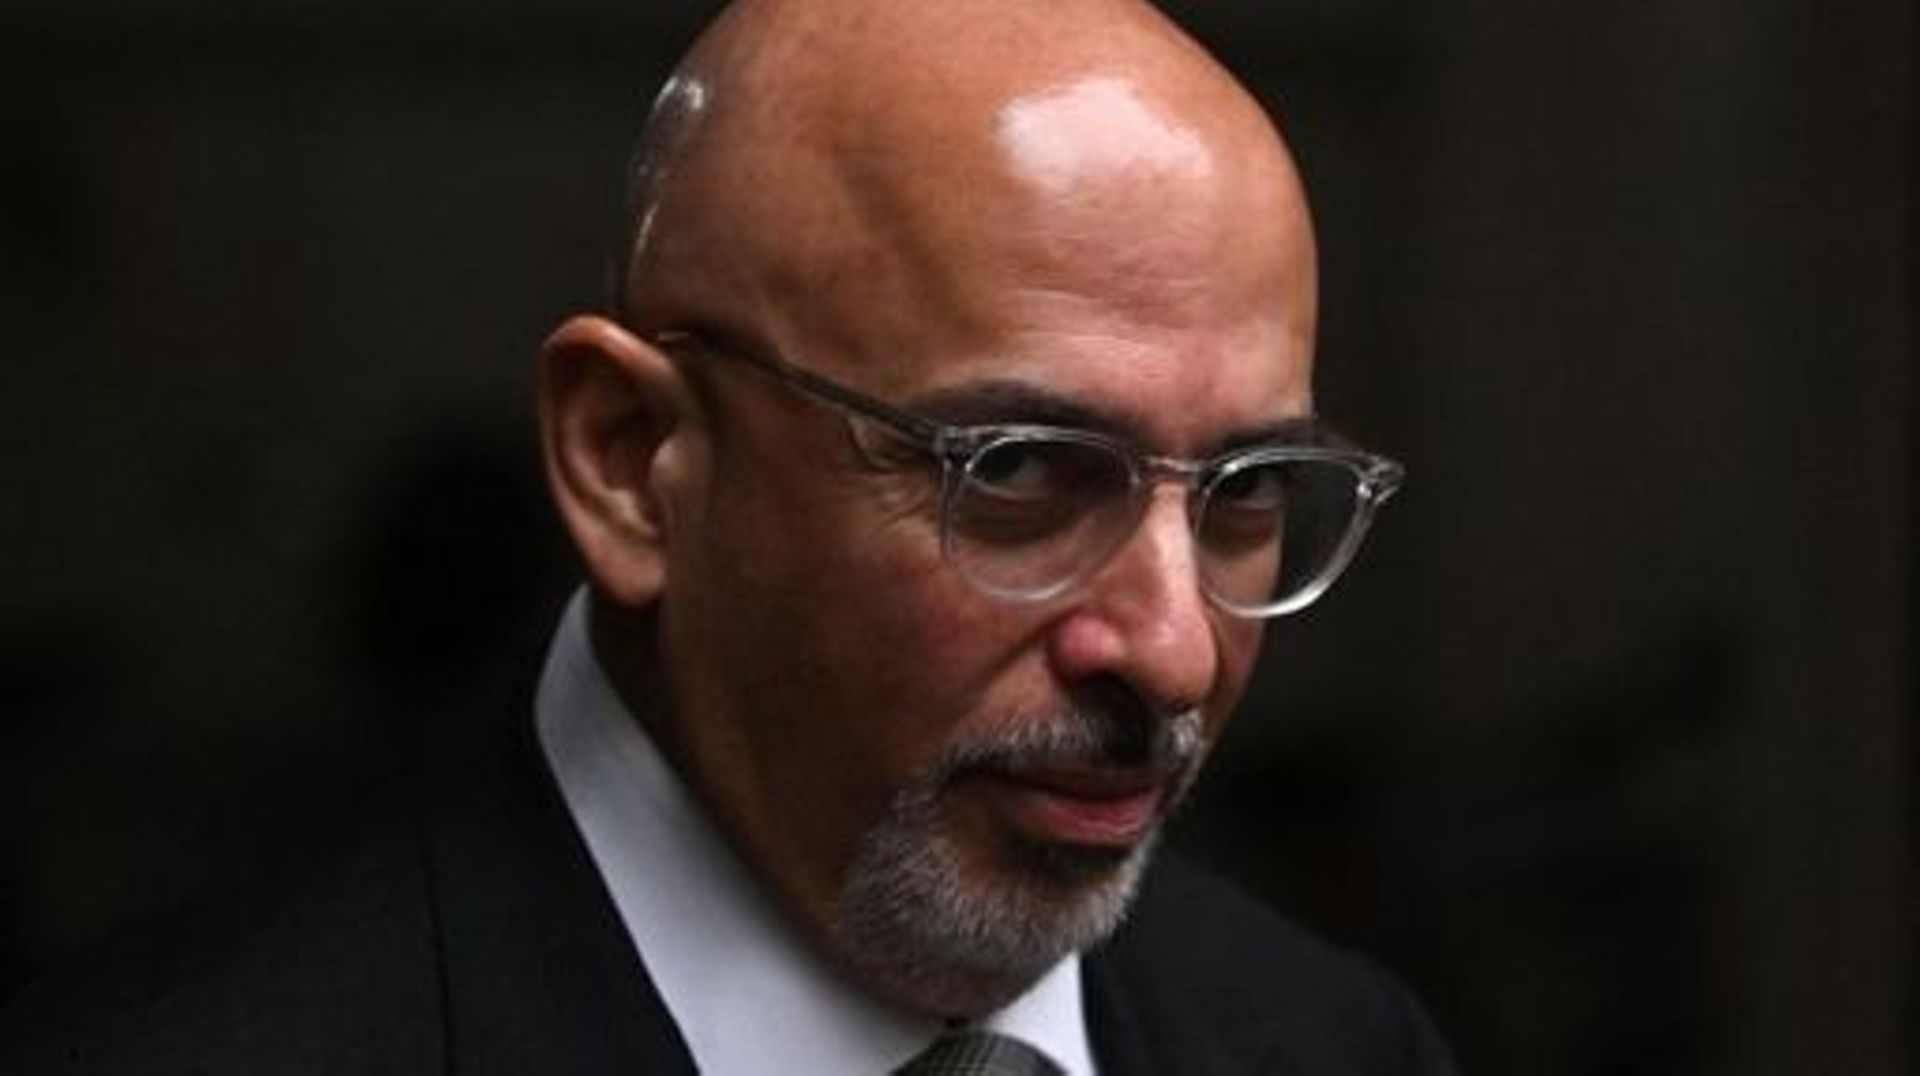 Britain’s Minister without Portfolio Nadhim Zahawi arrives in Downing Street in central London to attend a cabinet meeting ahead of the government’s full budget statement on November 17, 2022. Britain is set to unveil hefty tax rises and spending cuts at